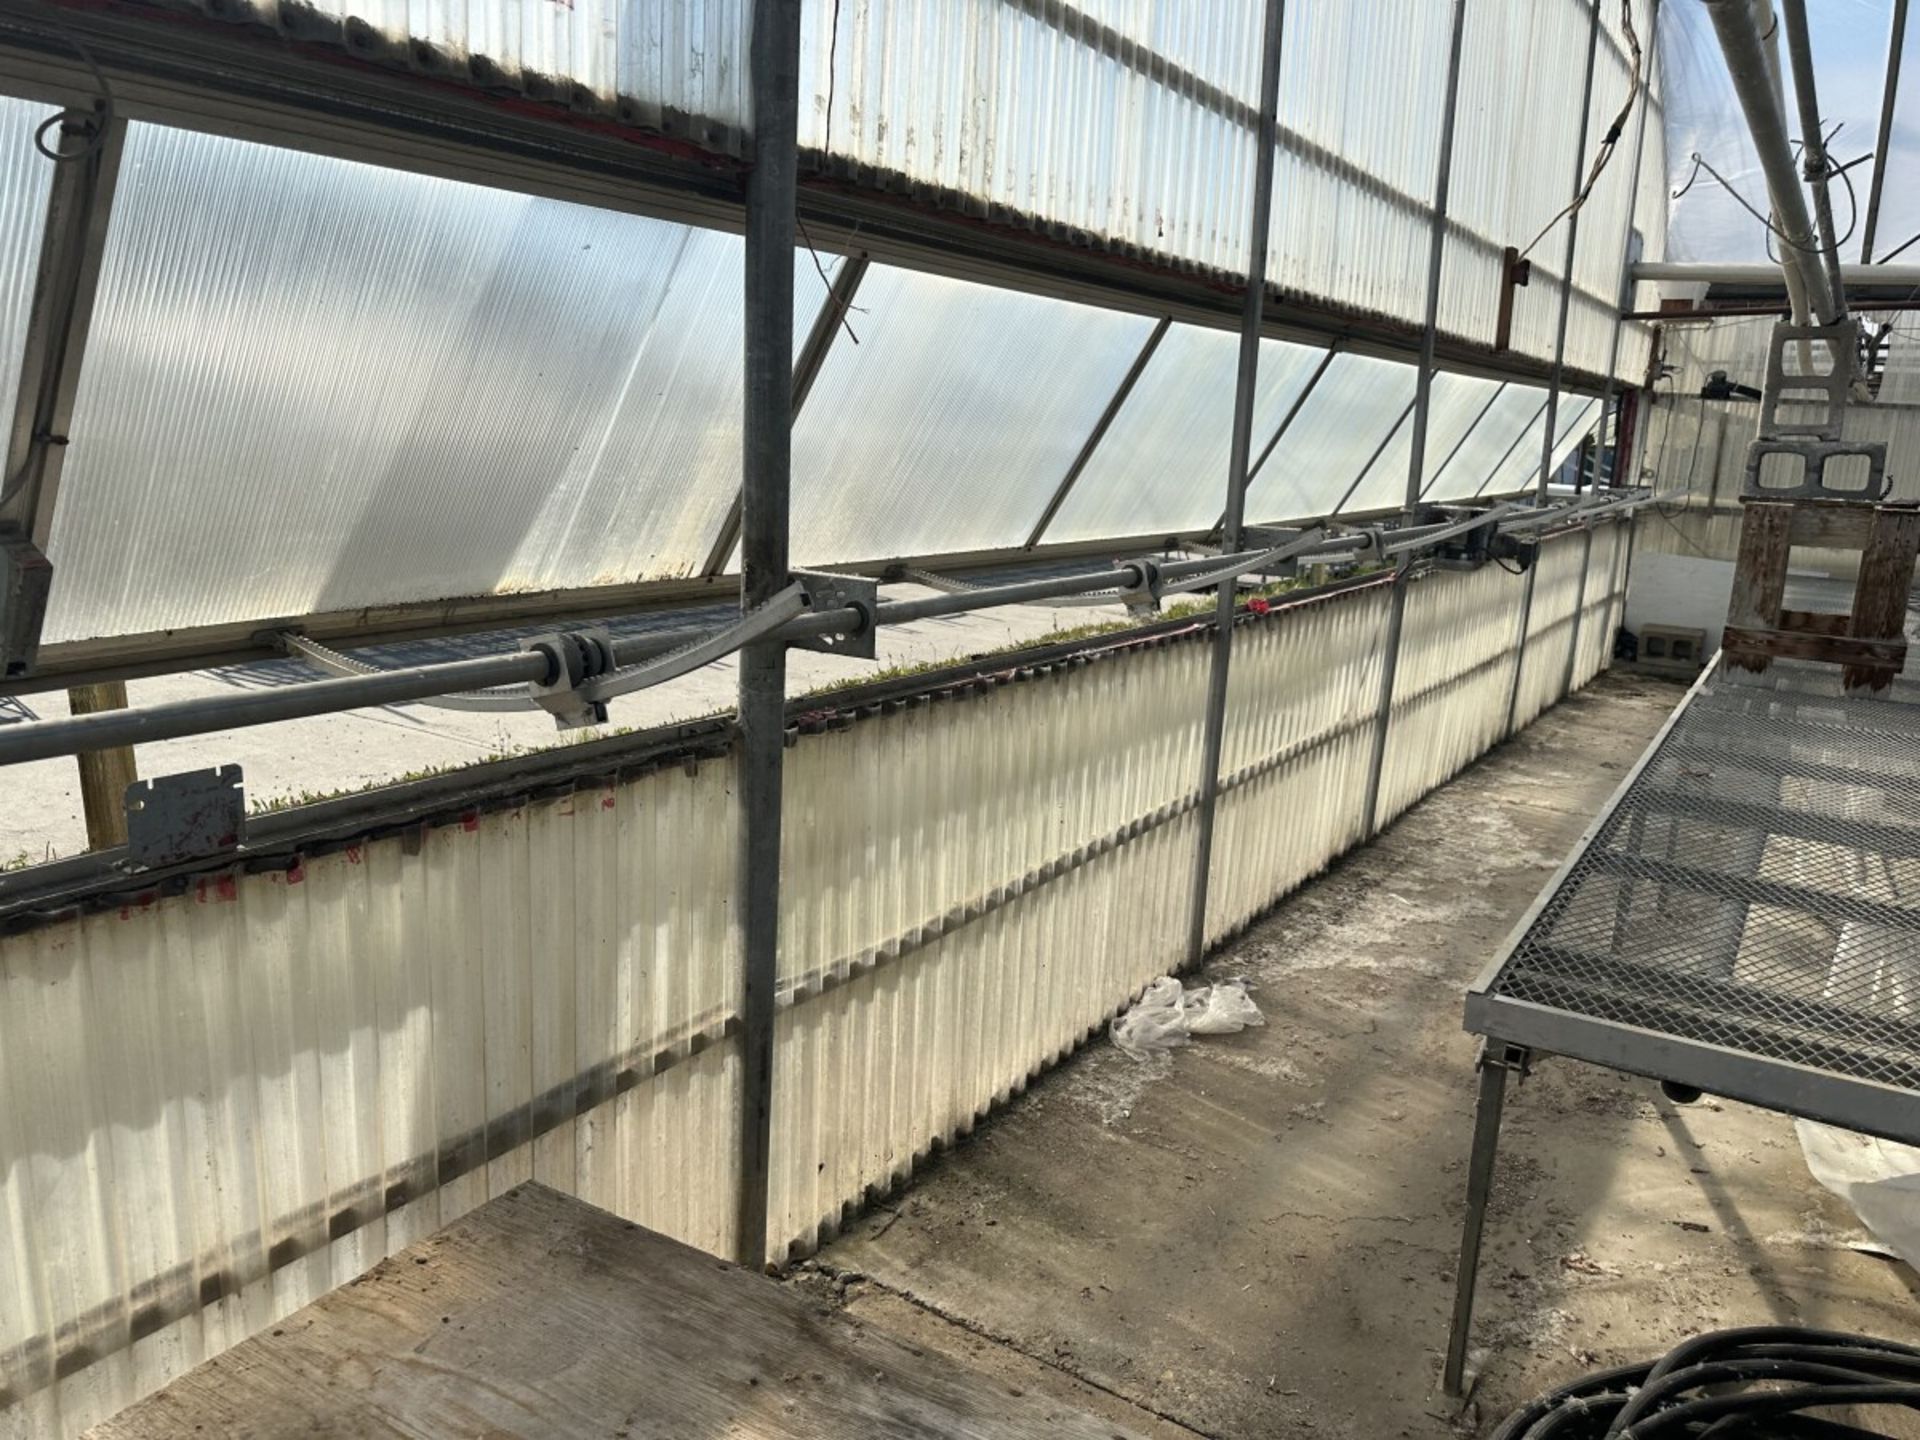 WESTBROOK GUTTER CONNECT 2-BAY GREENHOUSE 60FT X 144FT X 96” H & 2-BAY 60FT X 72 FT X 96”, INCLUDING - Image 67 of 95